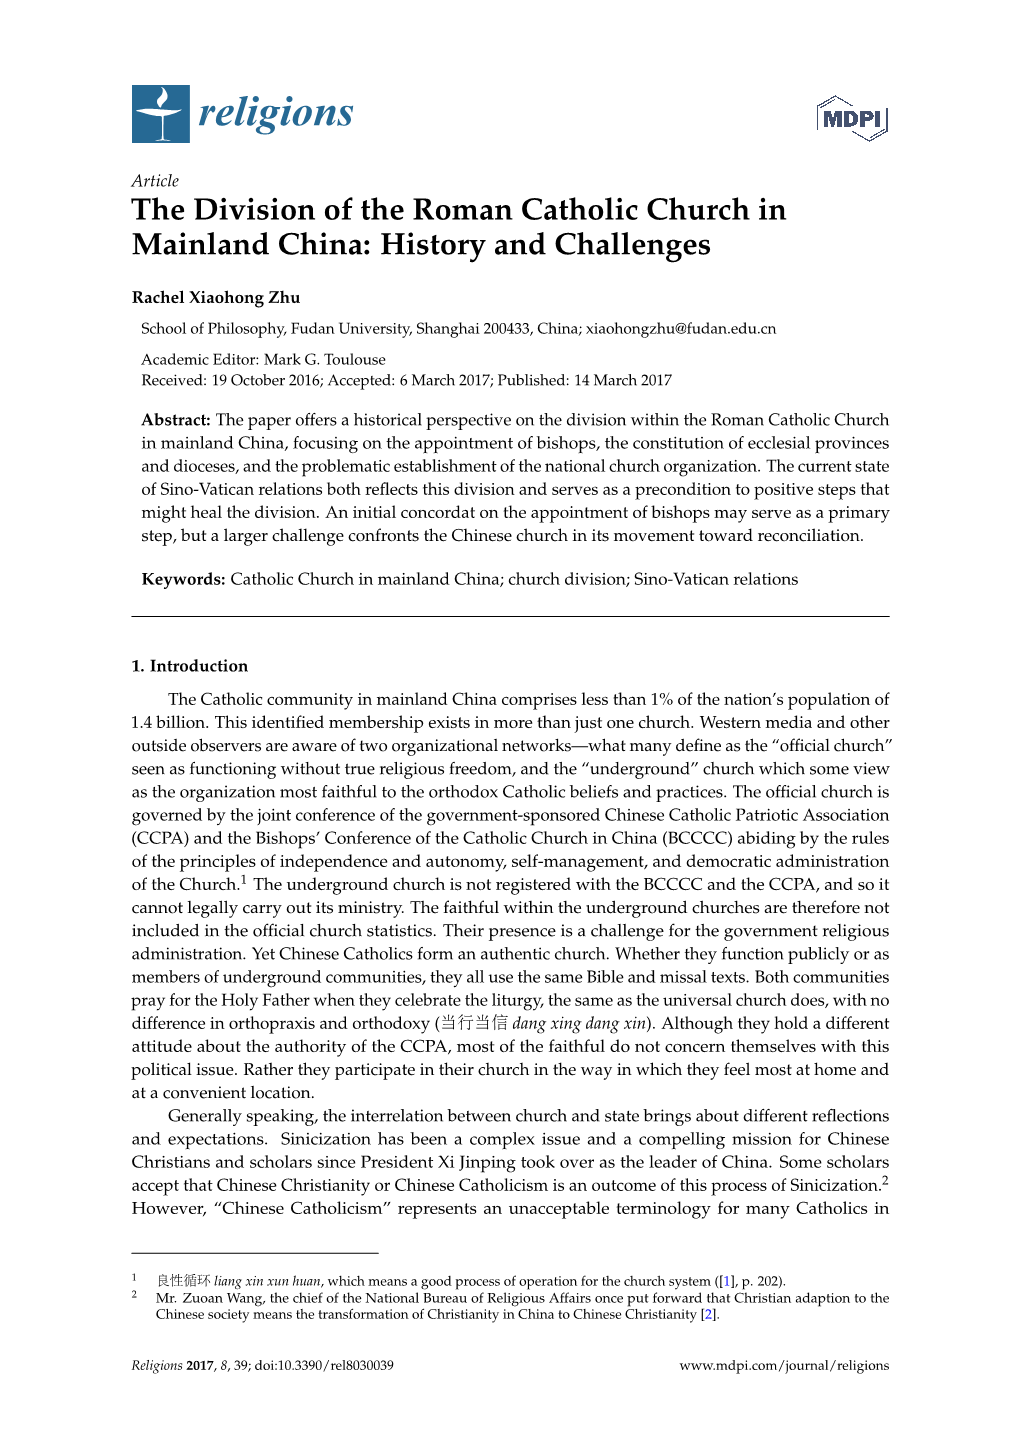 The Division of the Roman Catholic Church in Mainland China: History and Challenges